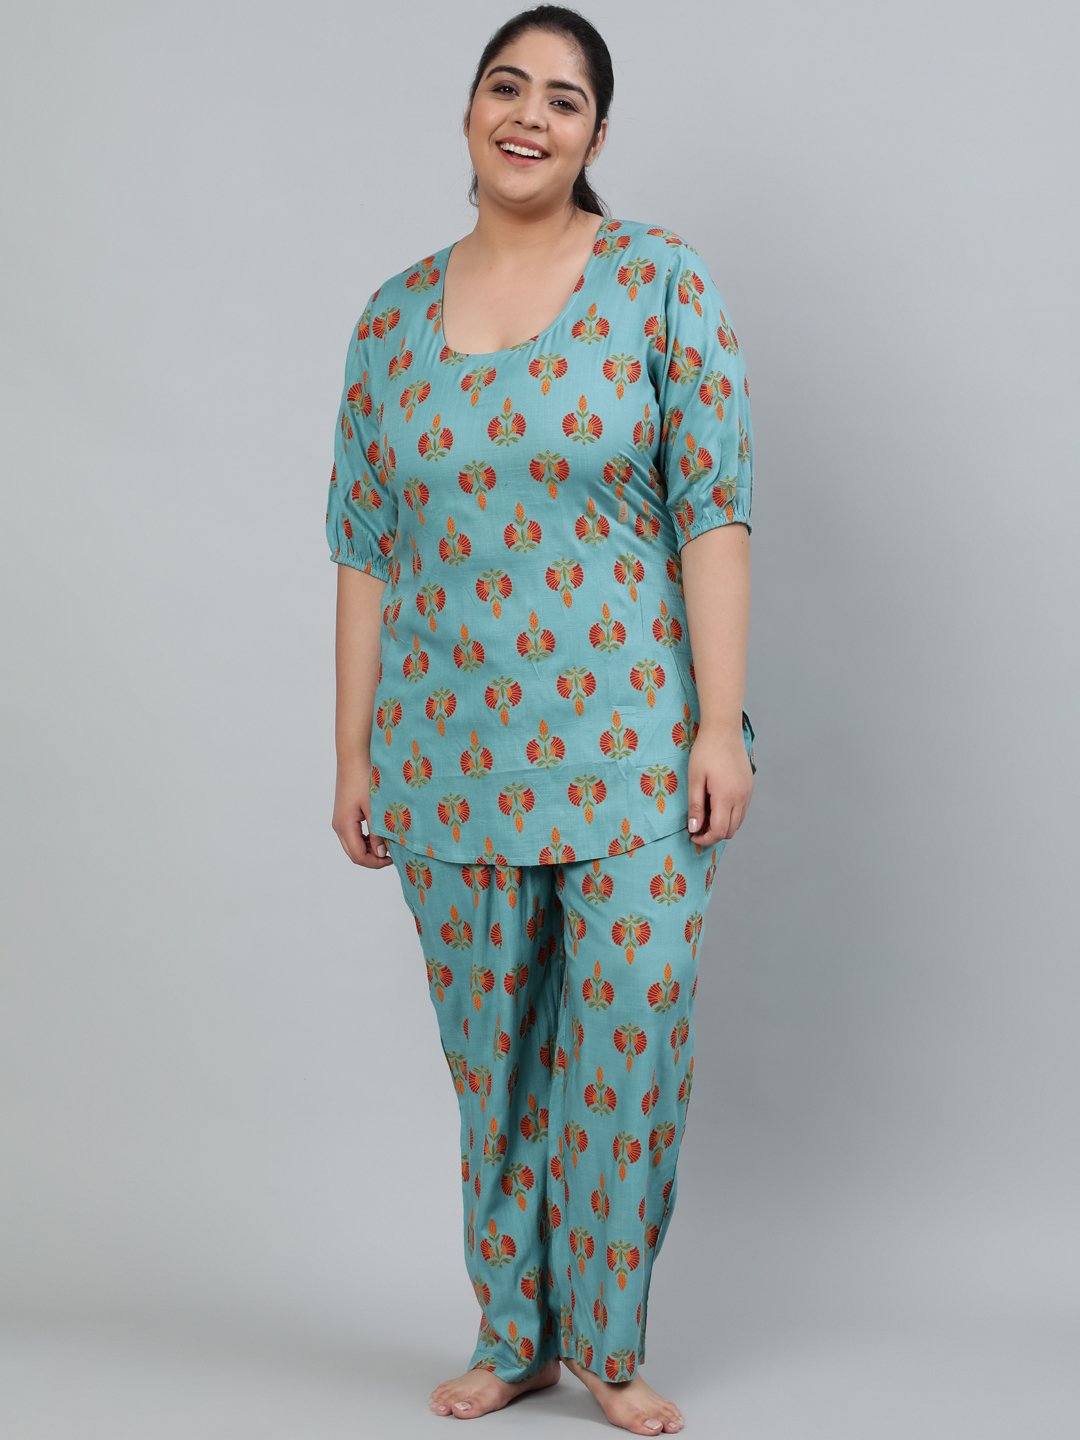 Women's Plus Size Blue Printed Night Suit With Half Sleeves - Nayo Clothing